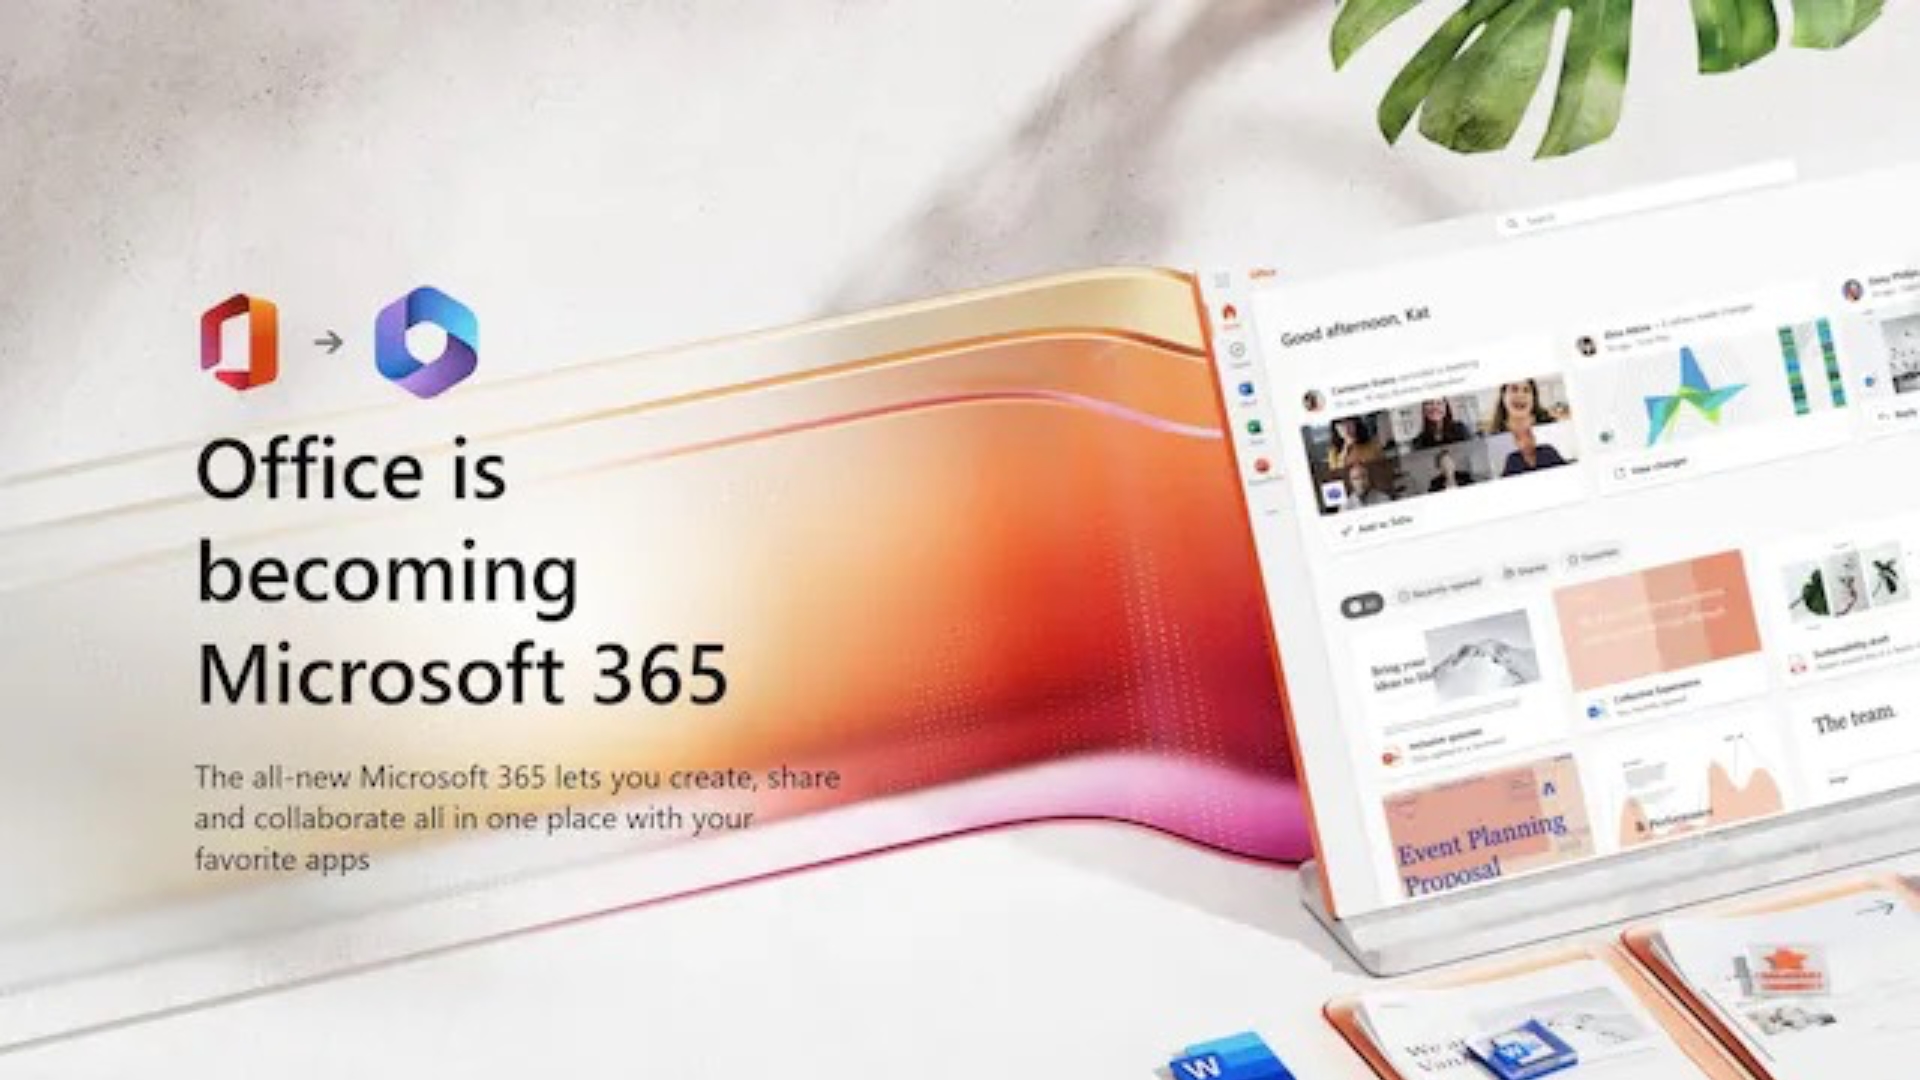 Microsoft Office to Become ‘Microsoft 365’ in Biggest Brand Overhaul in More Than 30 Years